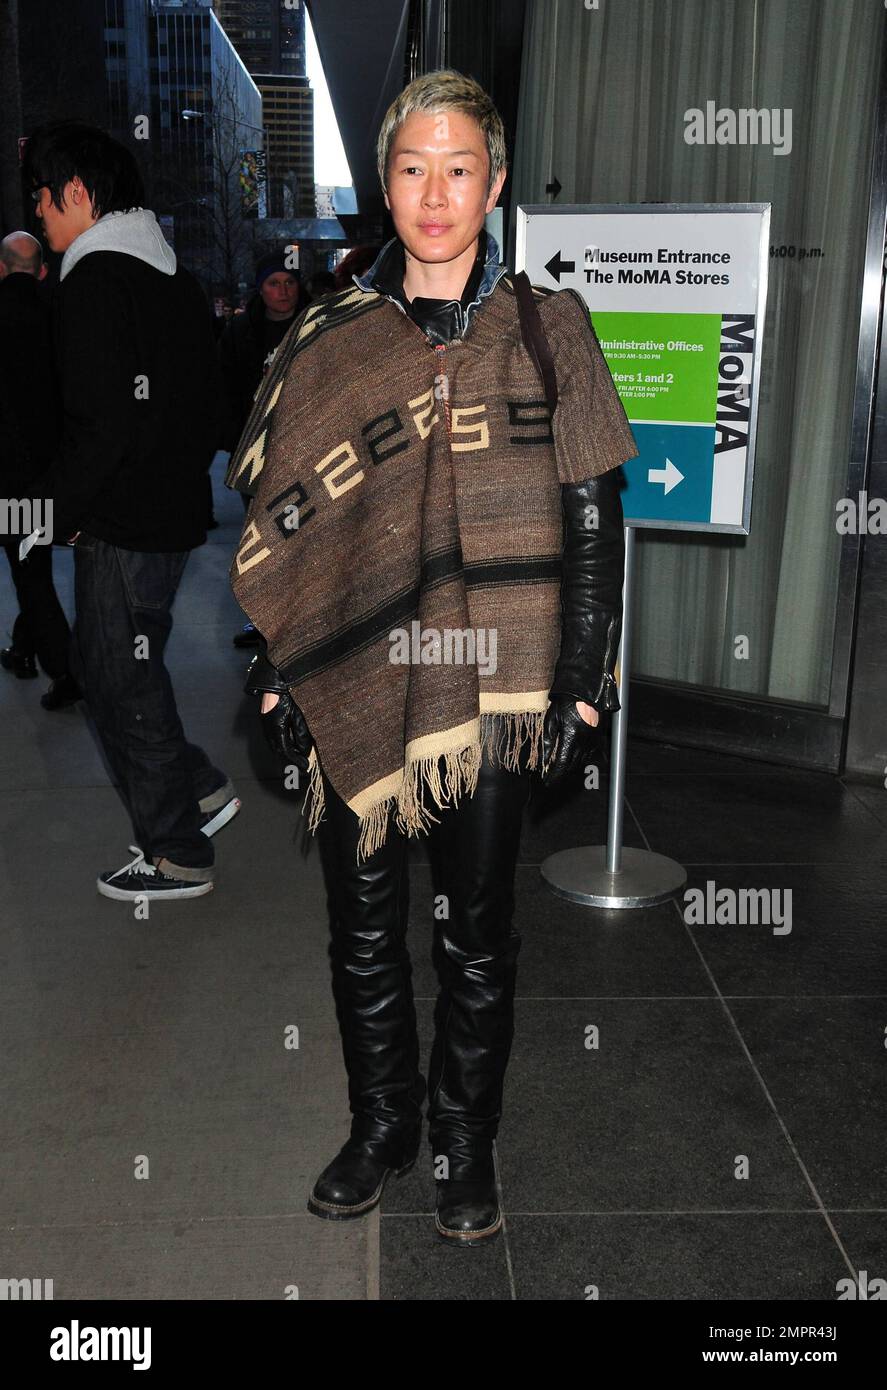 Jenny Shimizu arrives at the screening of David Ebersole's documentary 'Hit So Hard' at the Museum of Modern Art. The documentary is about former Hole drummer Patty Schemel. The screening marks the first public gathering of Hole in over a decade and, as part of the event, Love joined band members Patty Schemel, Eric Erlandson and Melissa auf der Maur for a Q&A following the screening. New York, NY. 3/28/11. Stock Photo